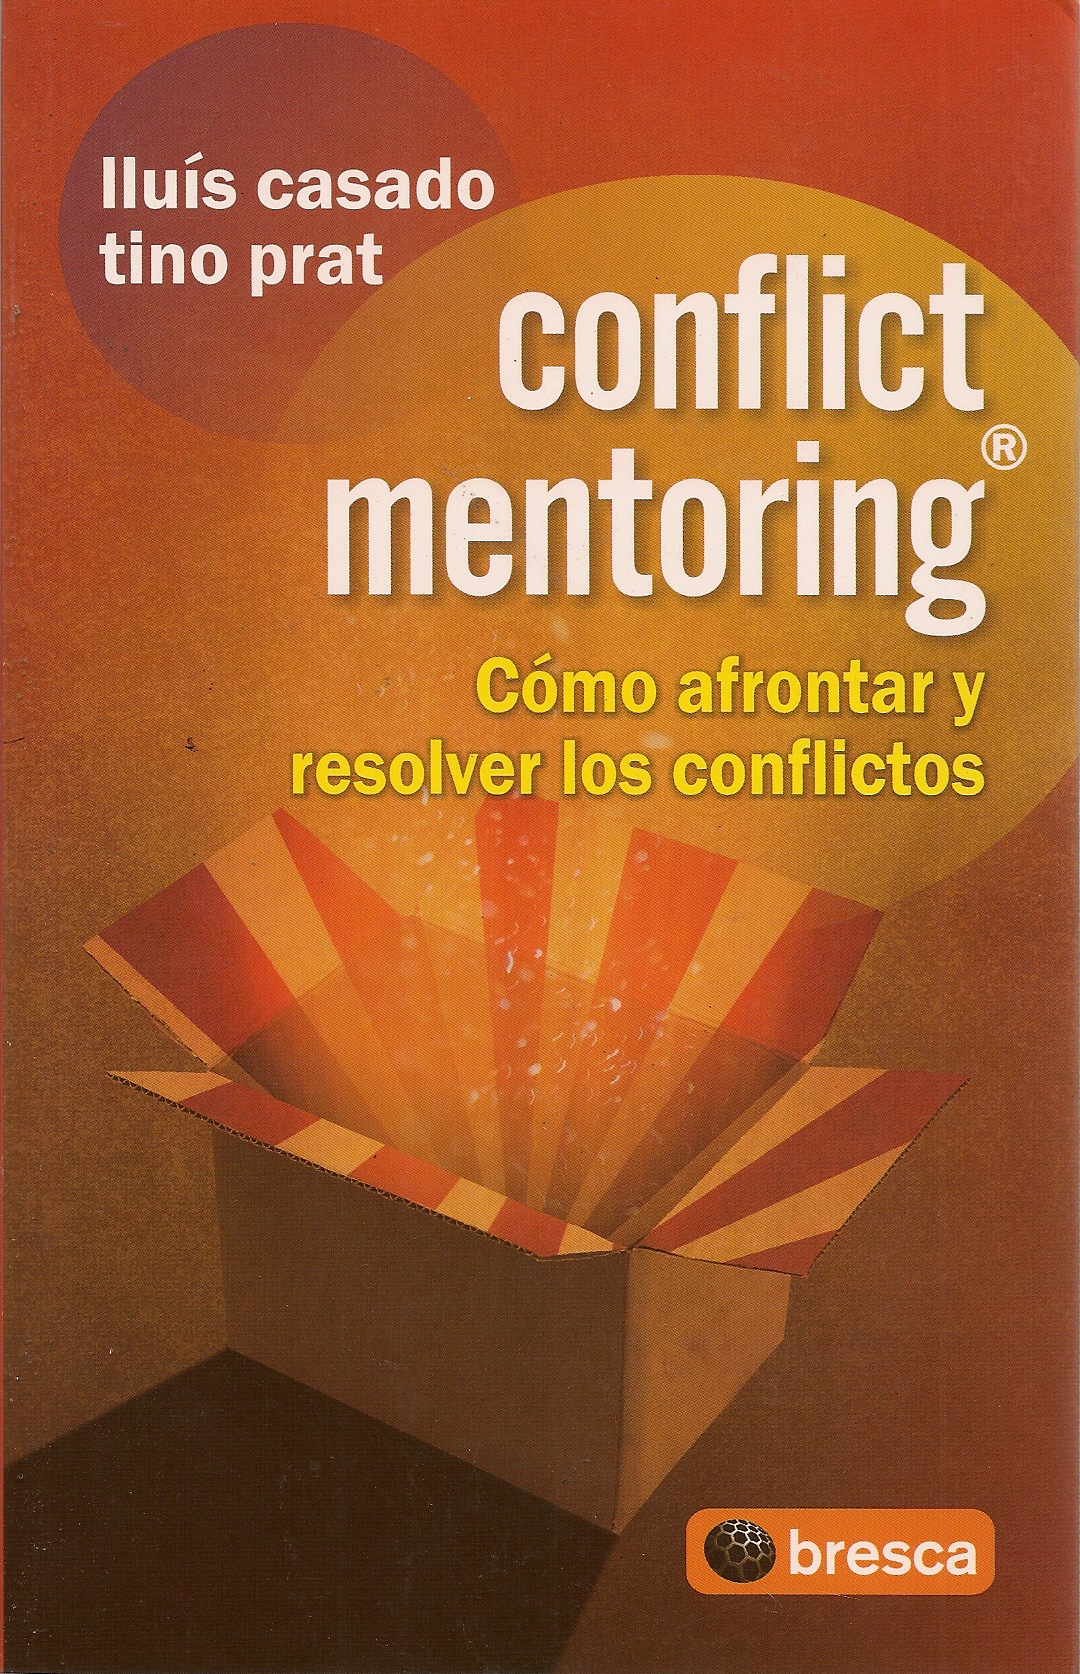 Conflict mentoring